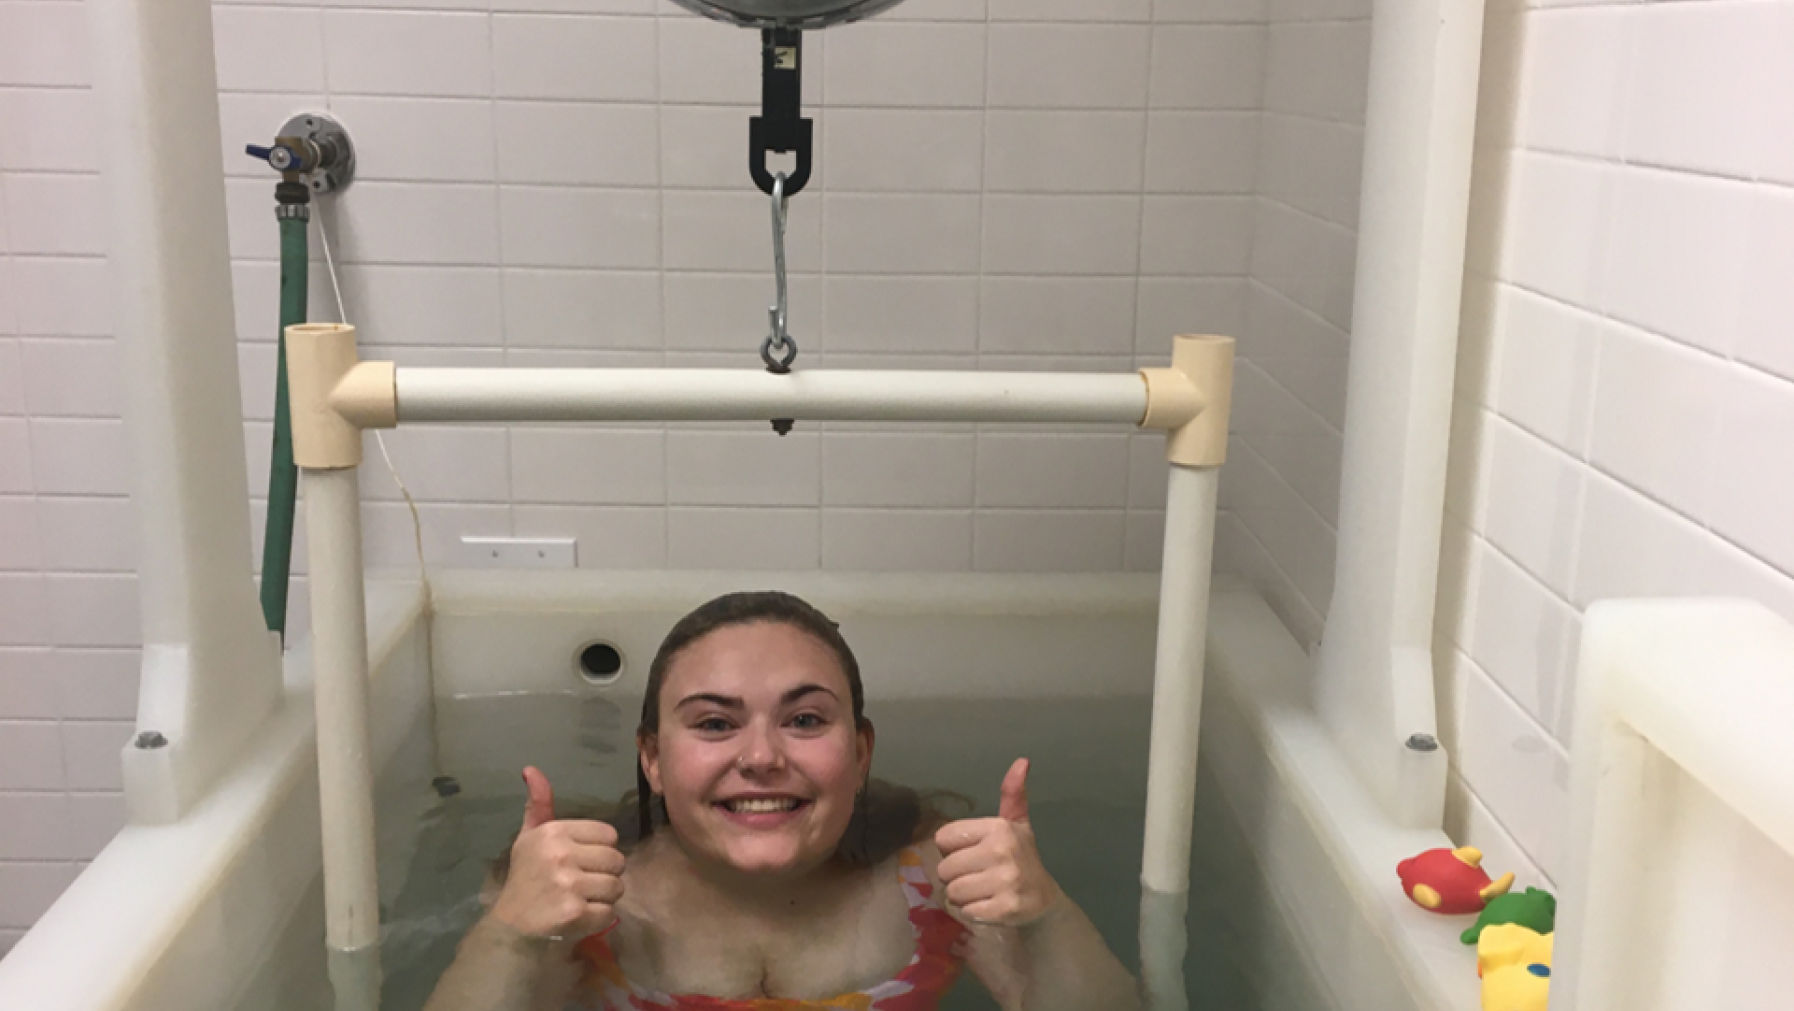 A person smiling and holding their thumbs up in water.